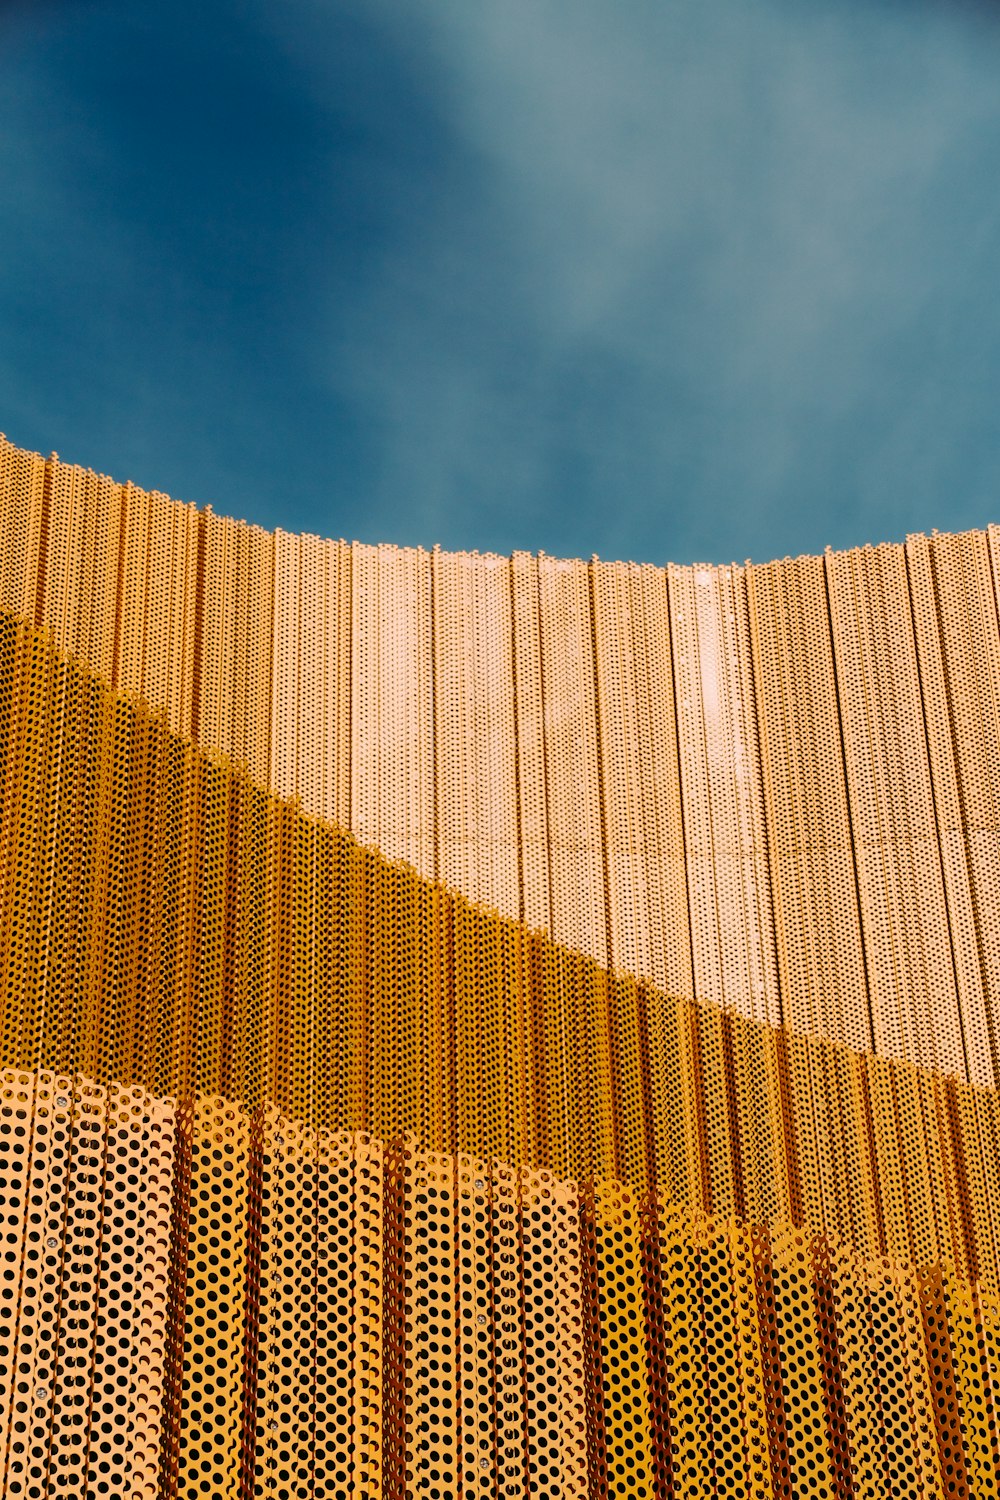 a building made of wooden slats with a blue sky in the background